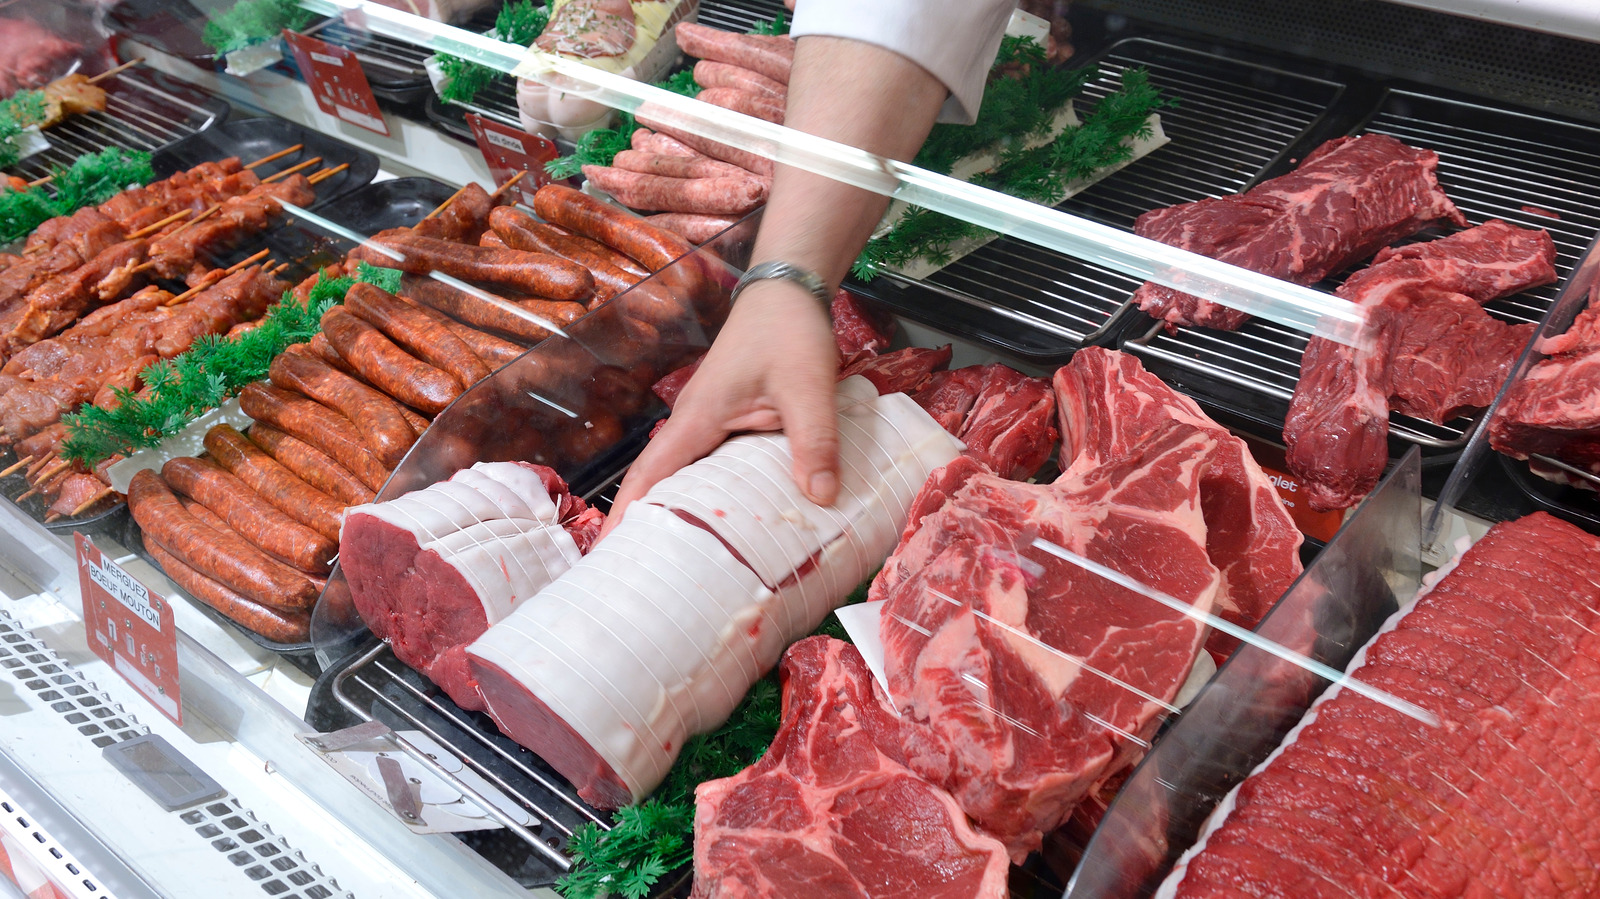 6 Best And 6 Worst Grocery Stores To Buy Meat